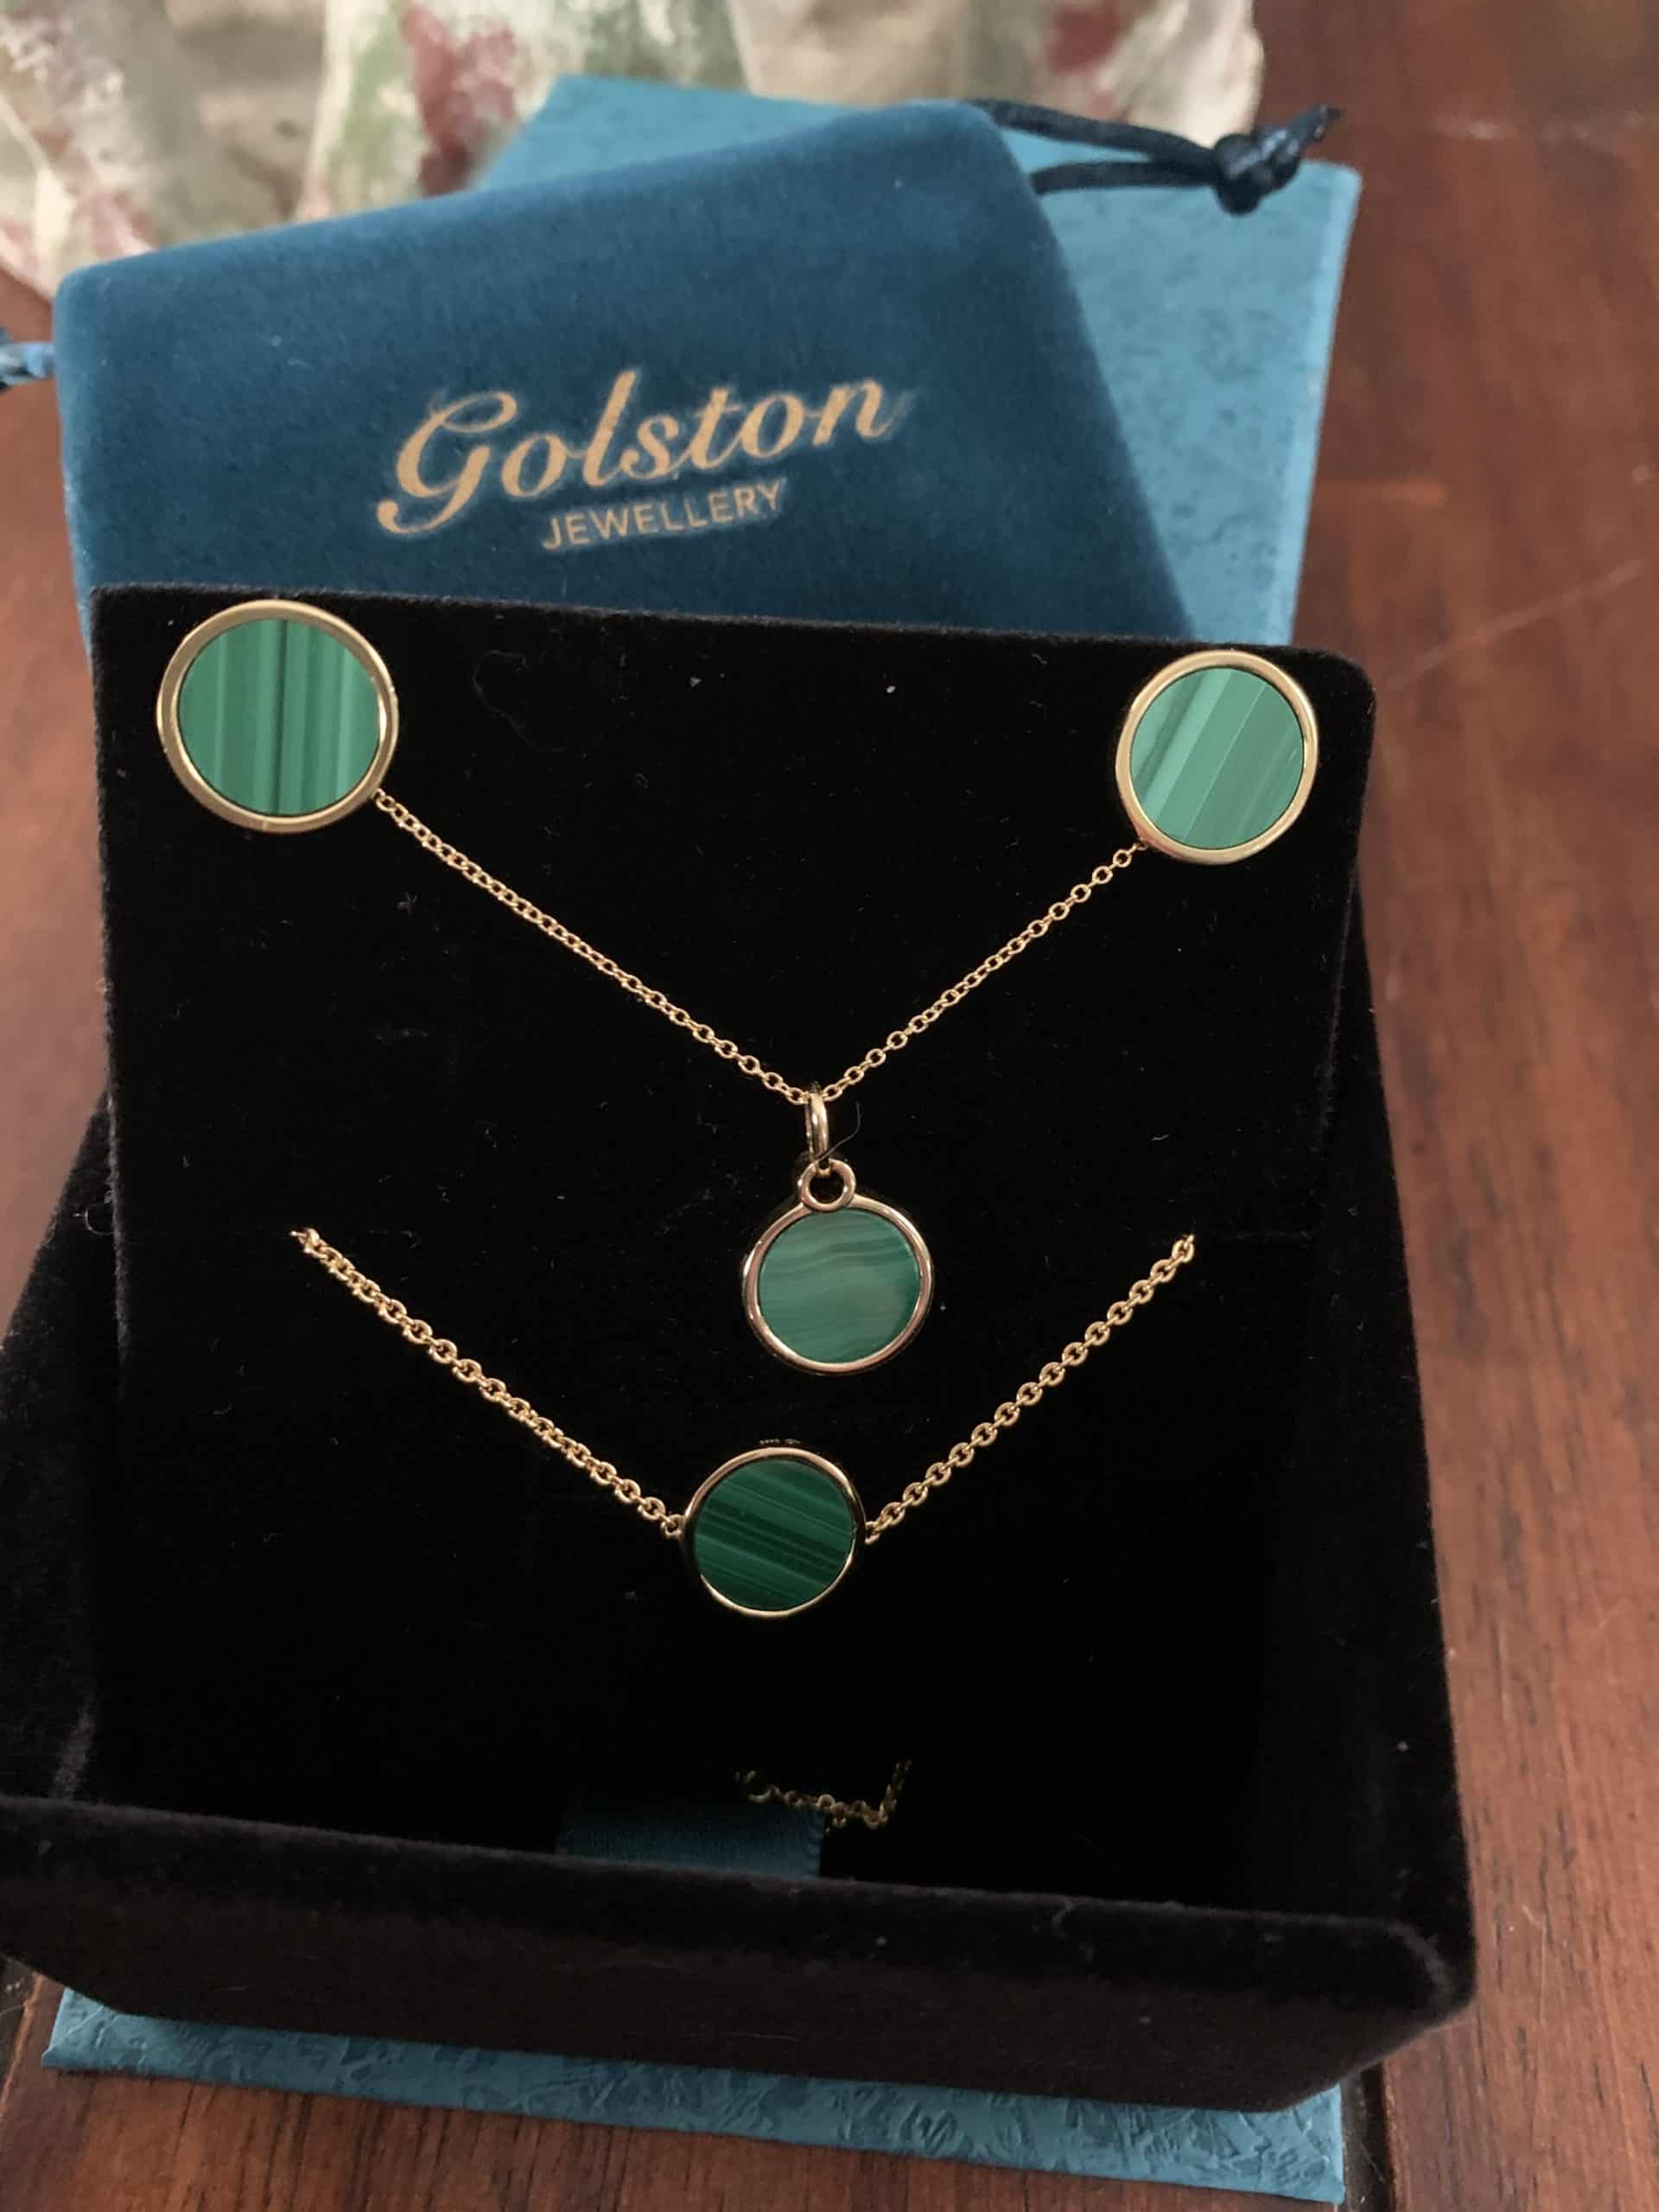 products to make your life easier in 2022 - golston jewelry